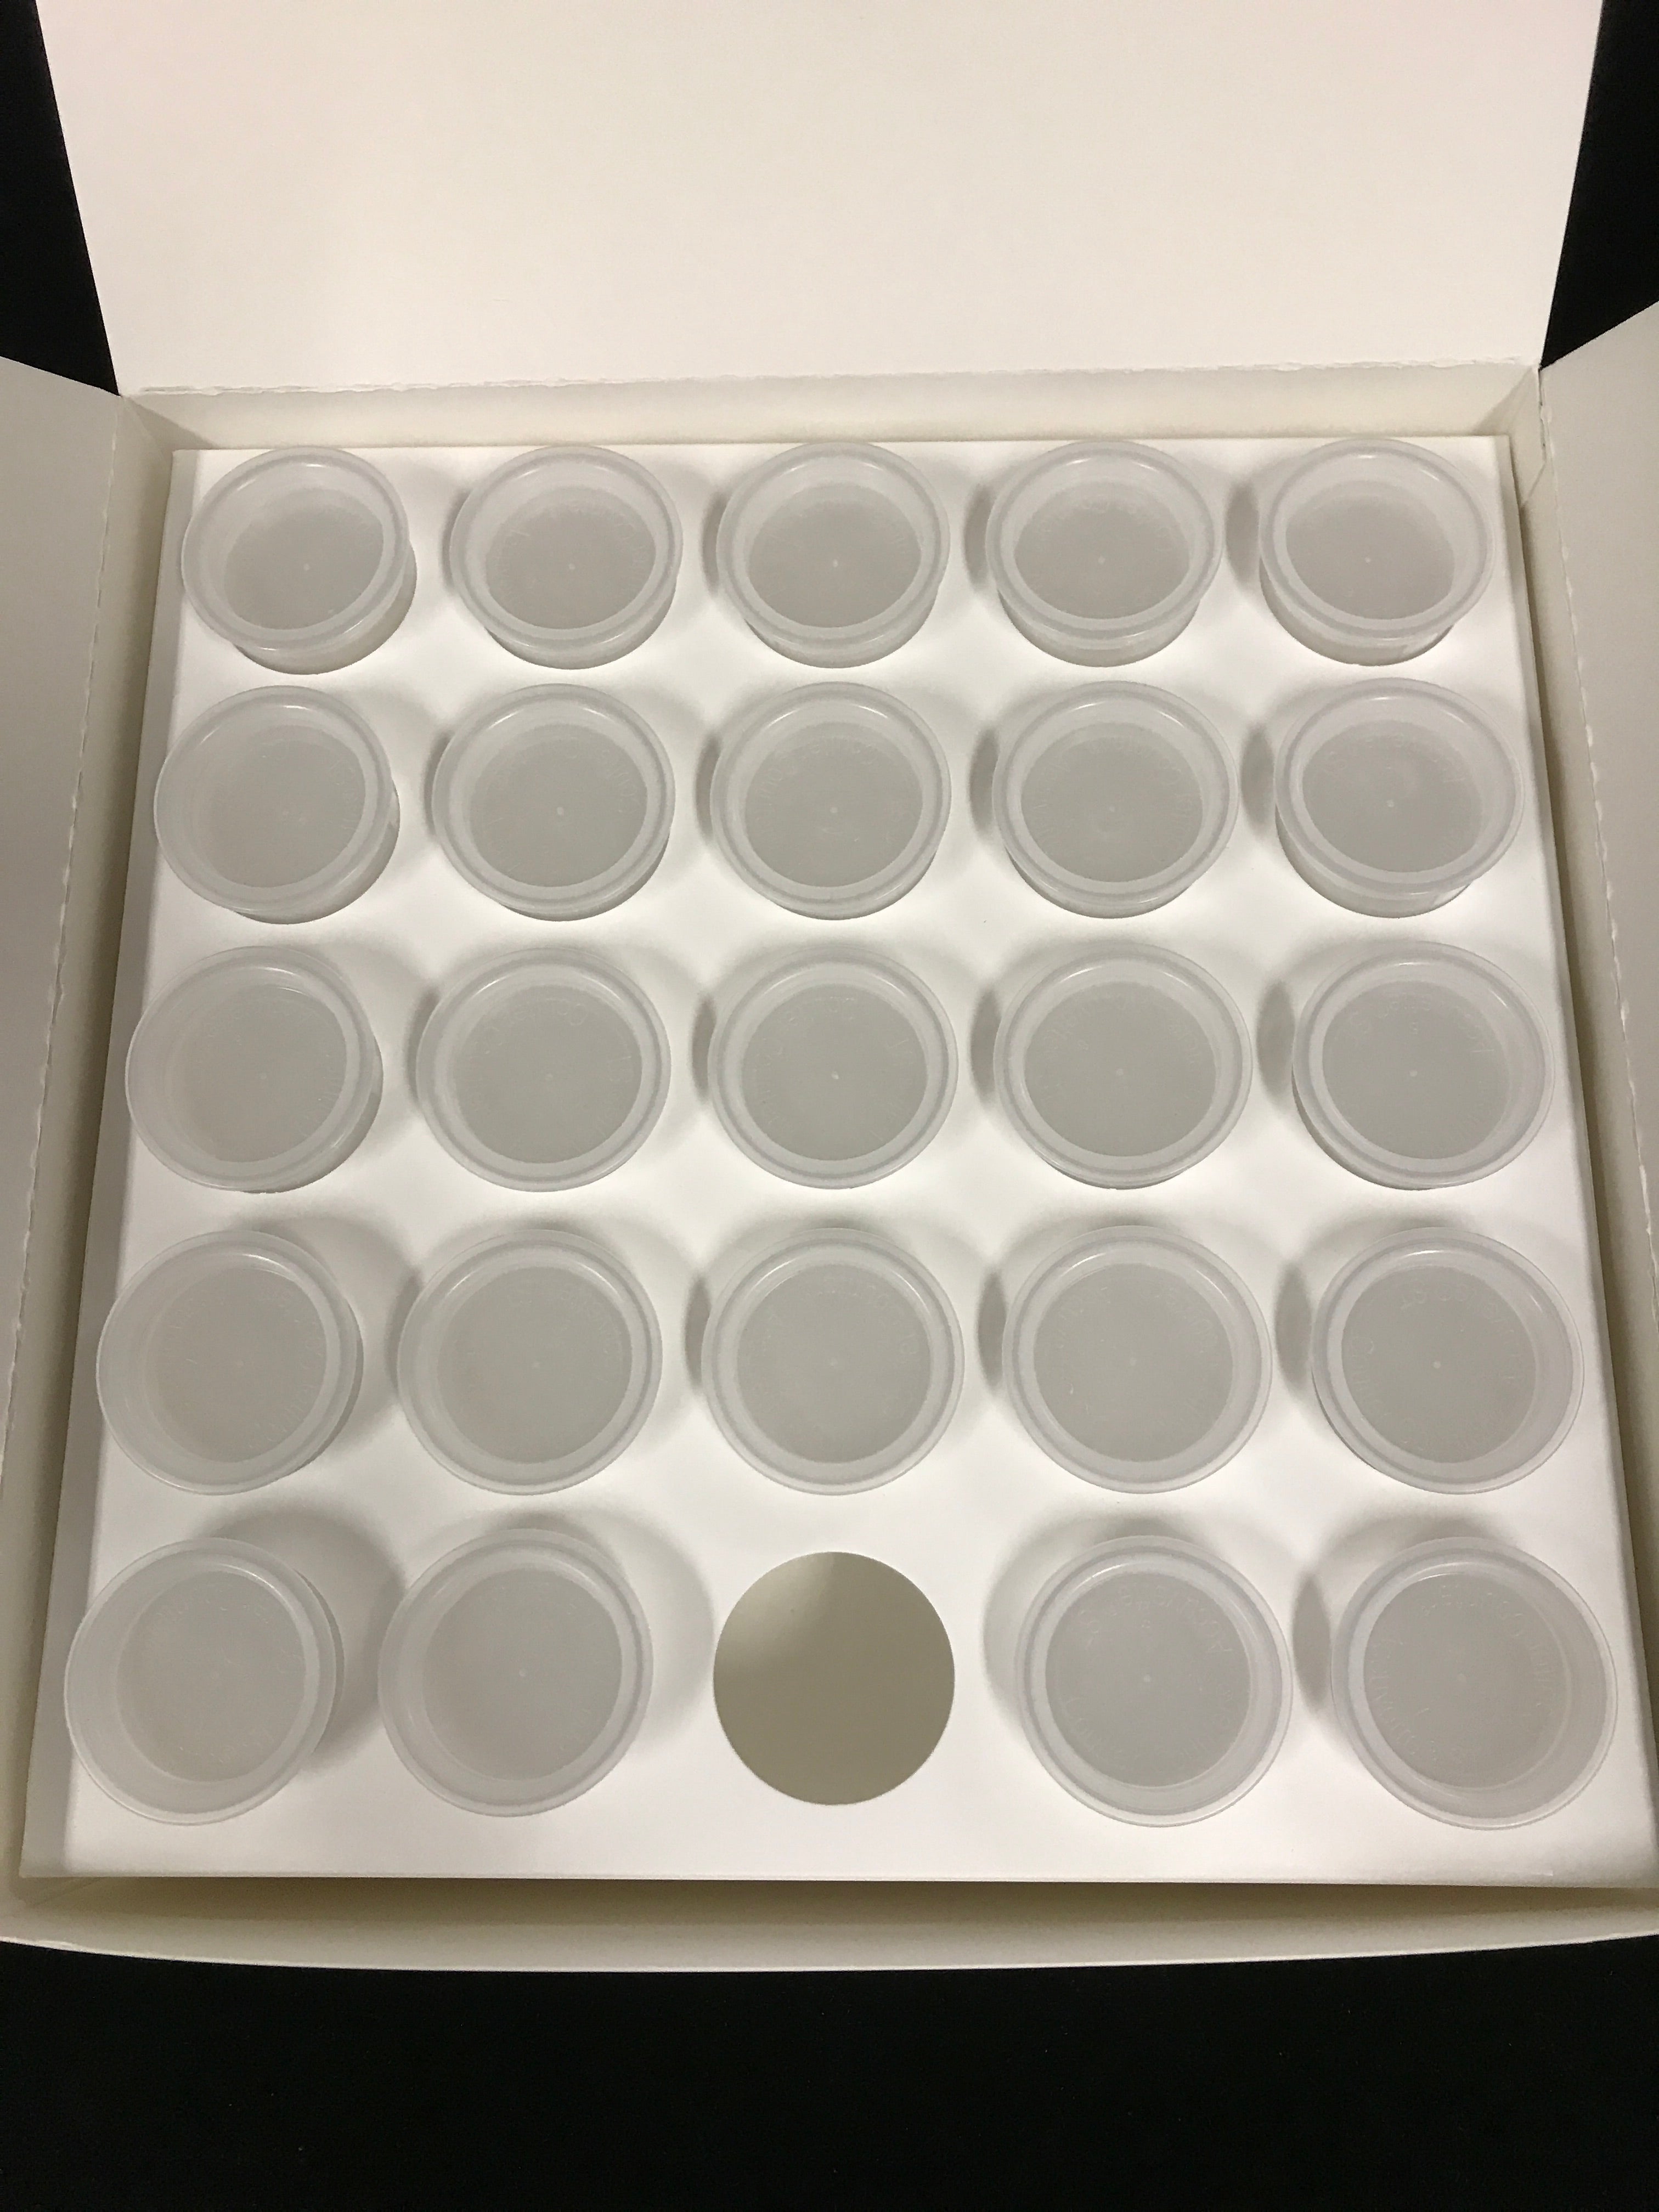 Box of 24 Beckman Coulter Accuvette ST 25mL Sampling Vials and Caps A35471